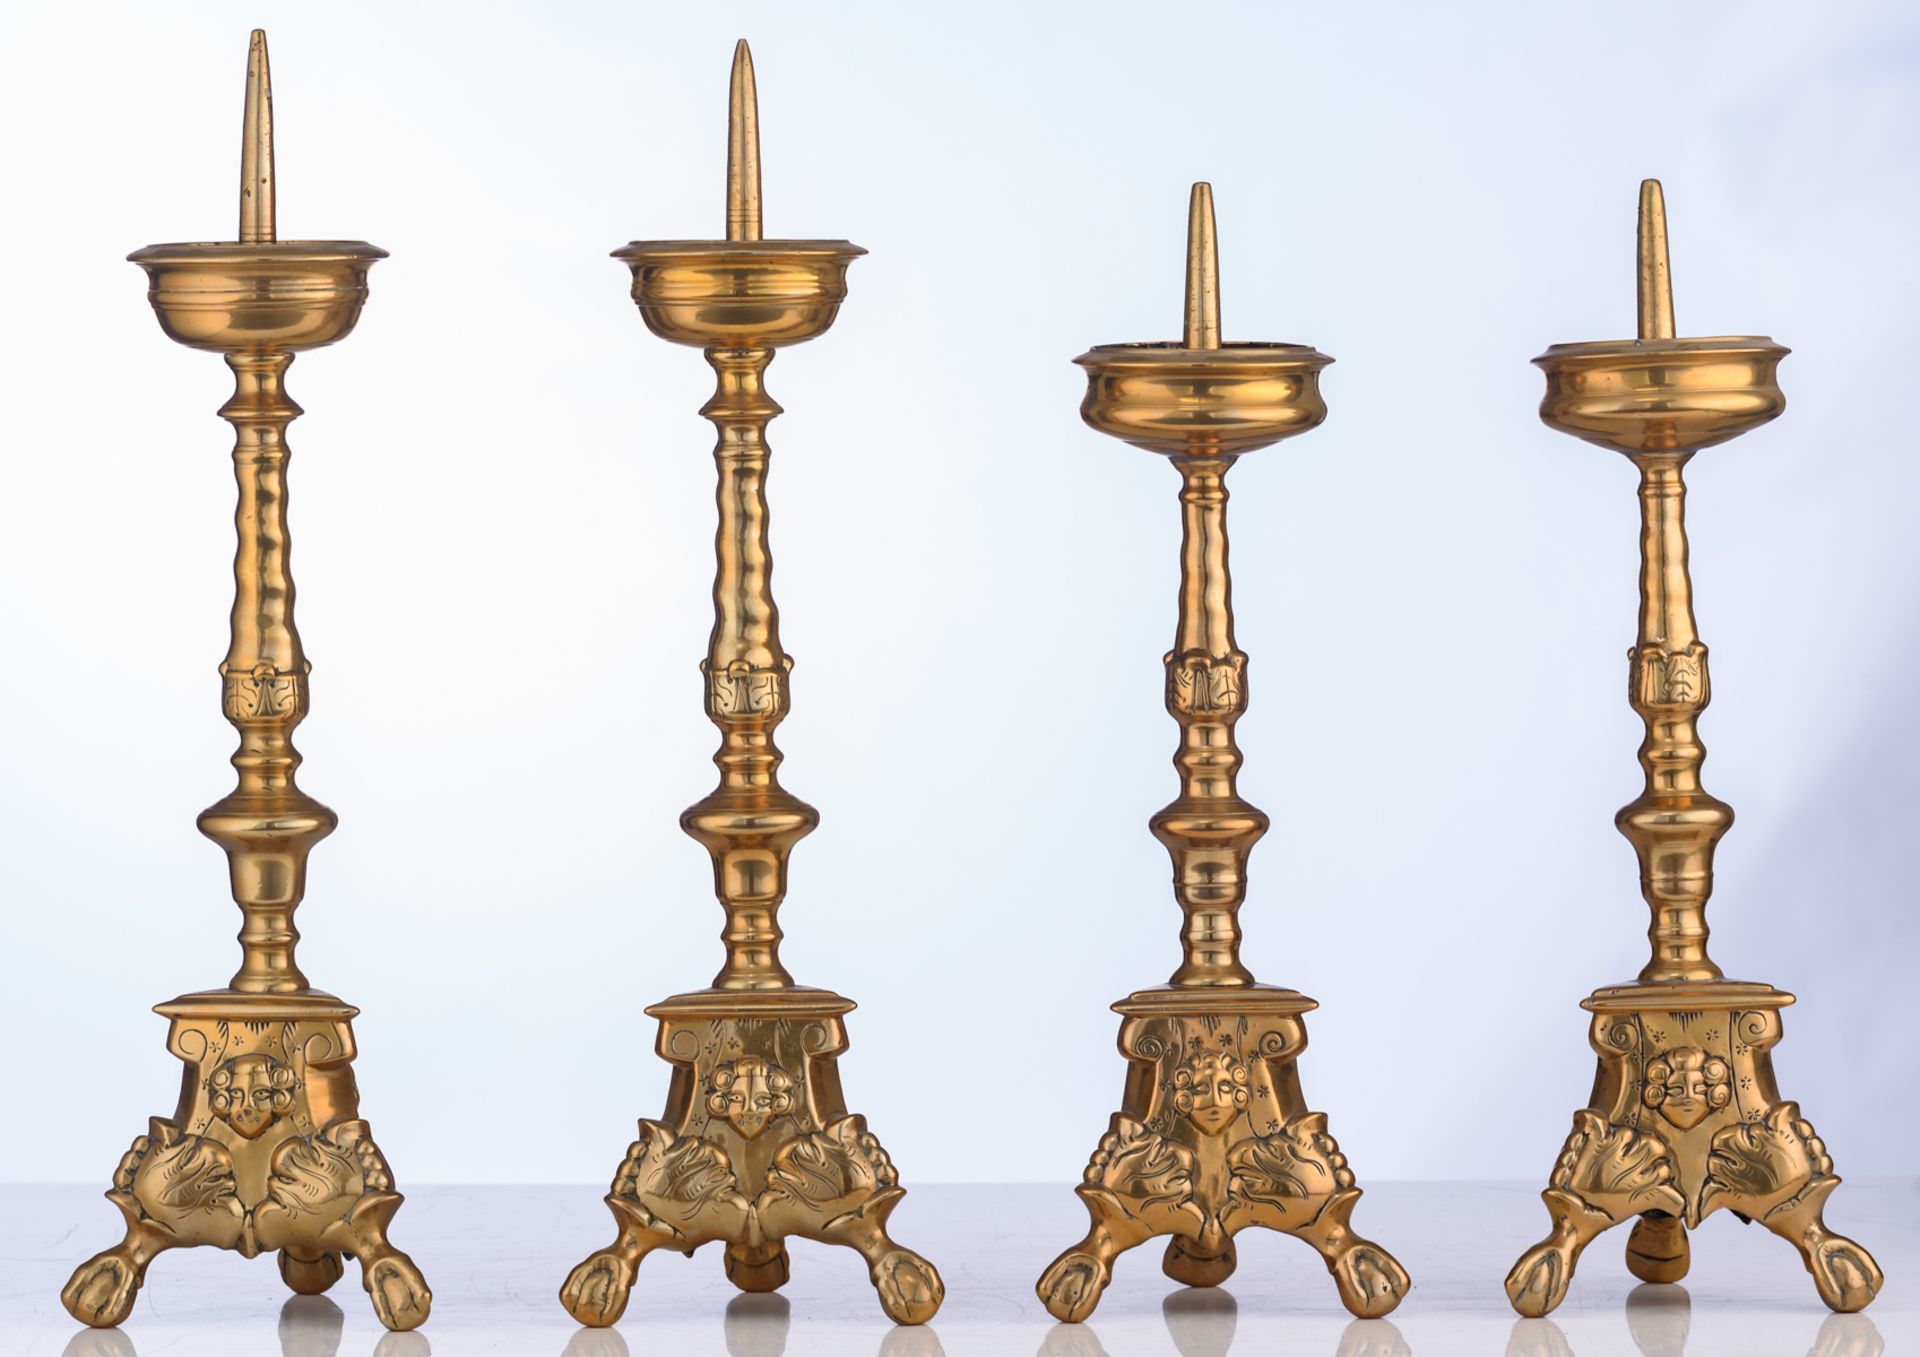 Two pair of Baroque bronze church candlesticks, 17thC, H 38,5 - 43 cm - Image 3 of 7